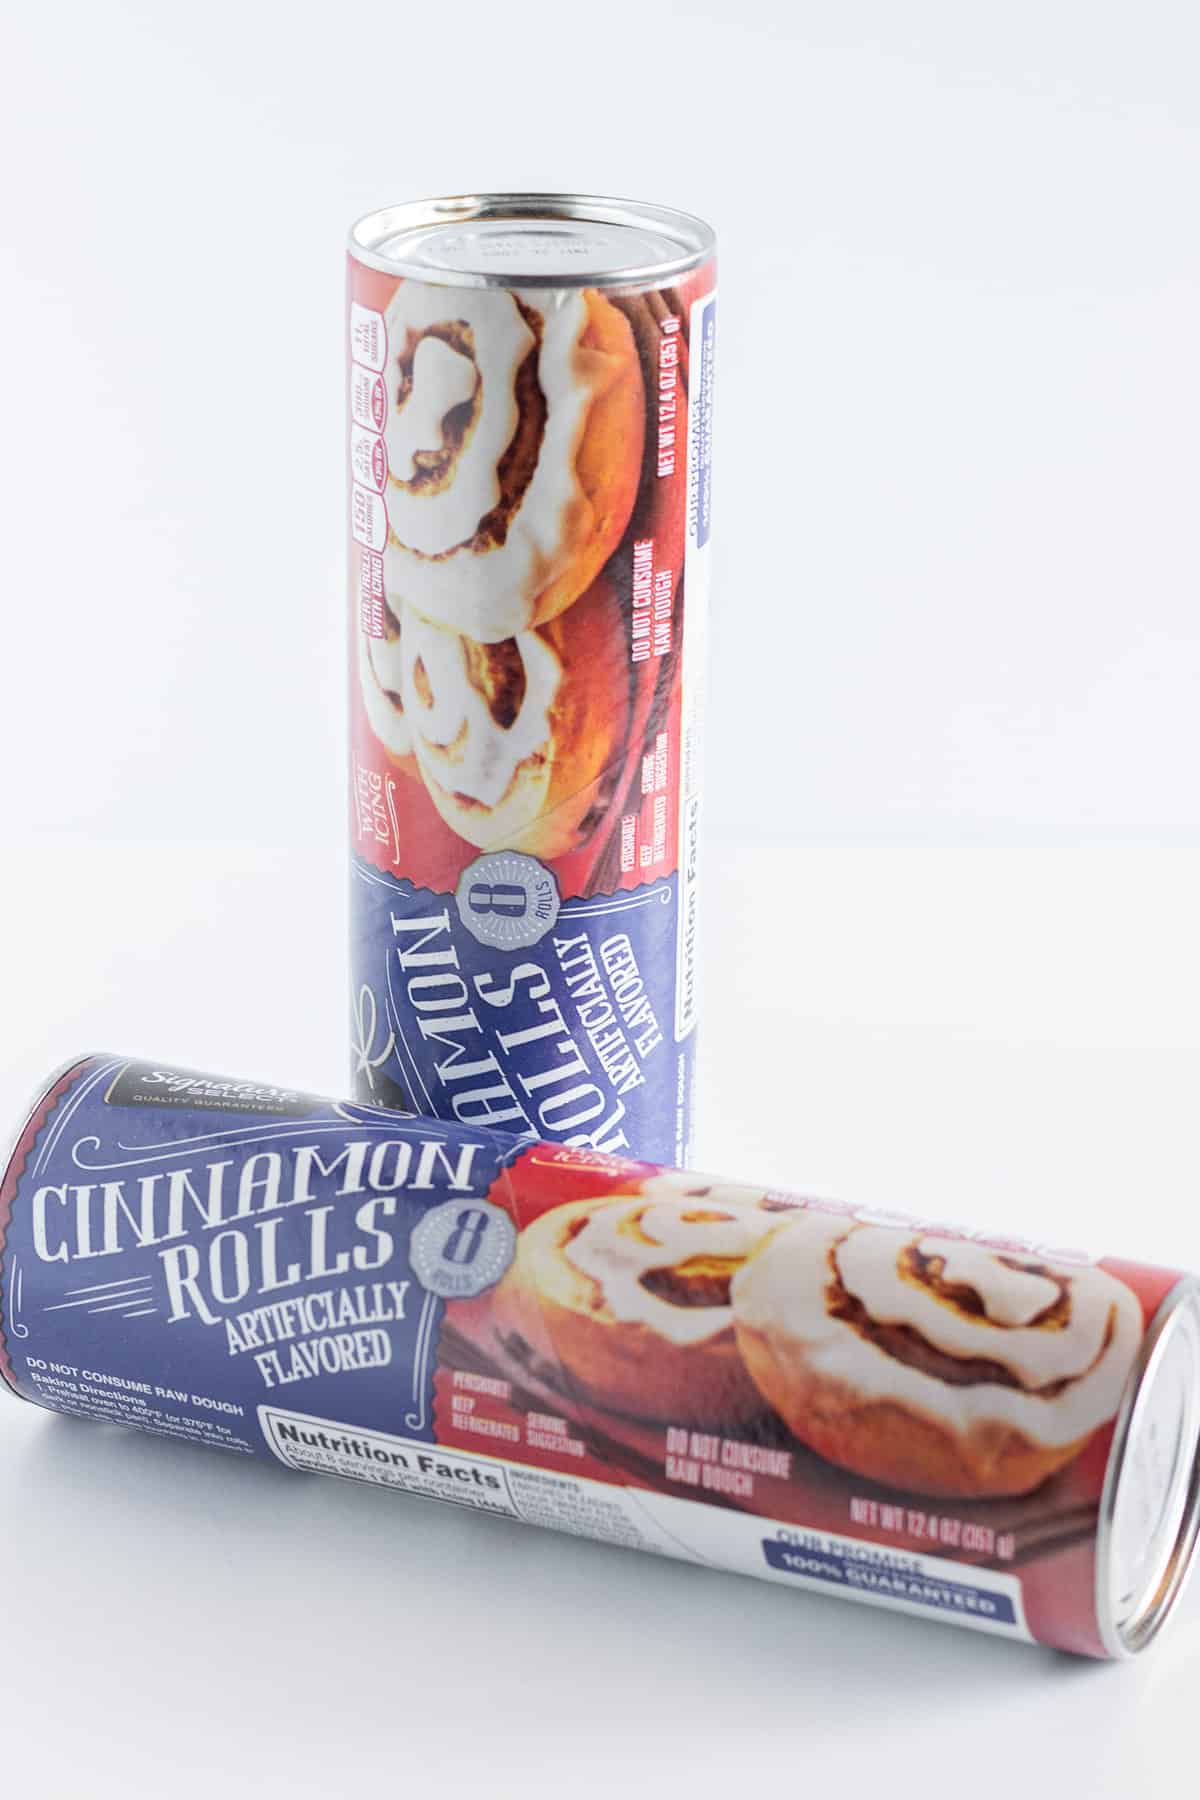 A photo of the one ingredient you need to make a bunny cinnamon roll, refrigerated cinnamon rolls.